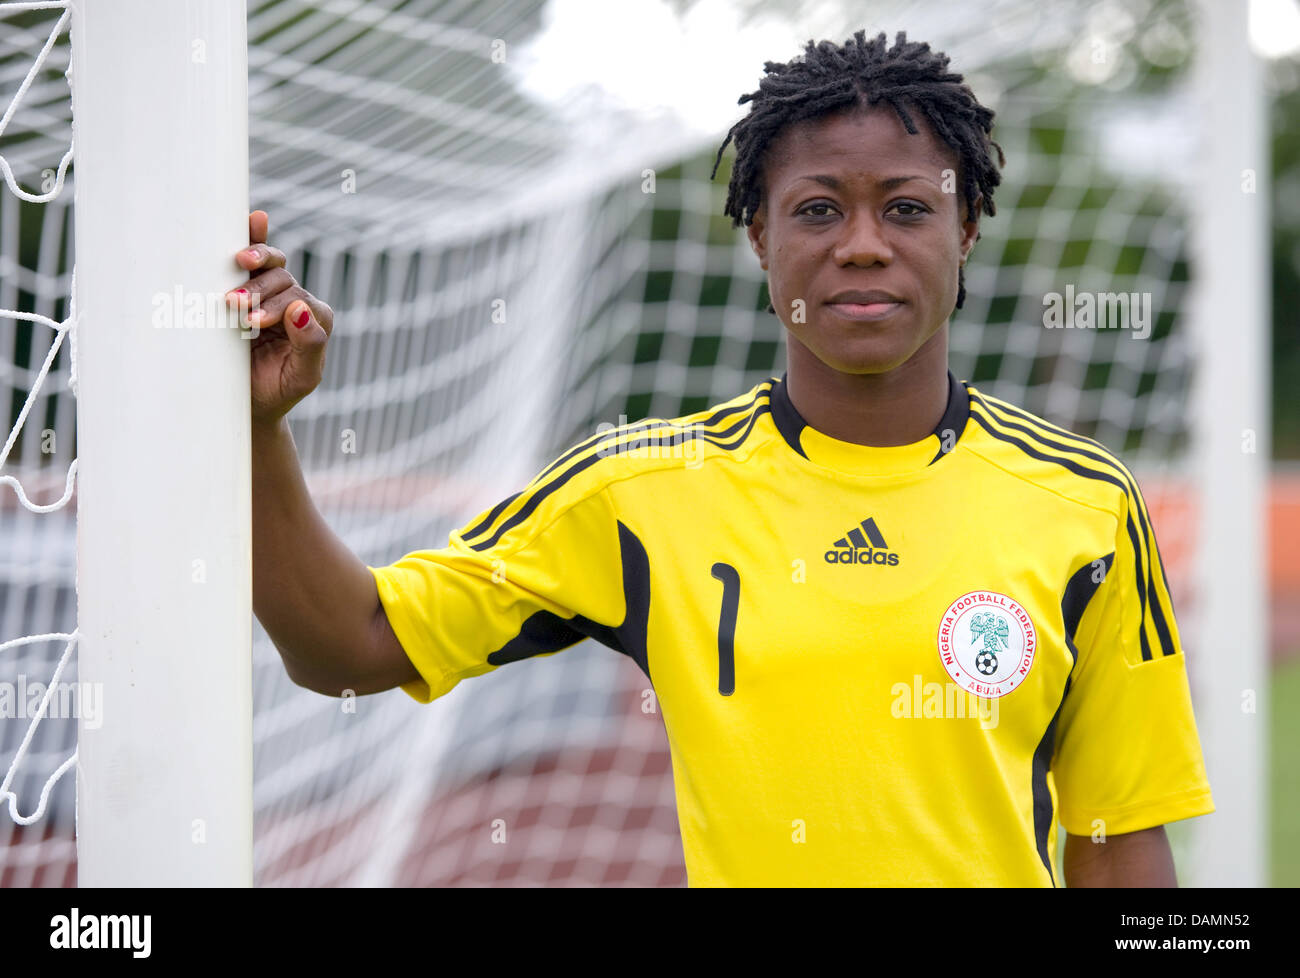 The goalkeeper of the Nigerian national women's soccer team, Precious Dede, stands at a goalpost during practice in Heidelberg, Germany, 23 June 2011. The Nigerian team plays its first match against France on 26 June 2011. Photo: Uwe Anspach Stock Photo